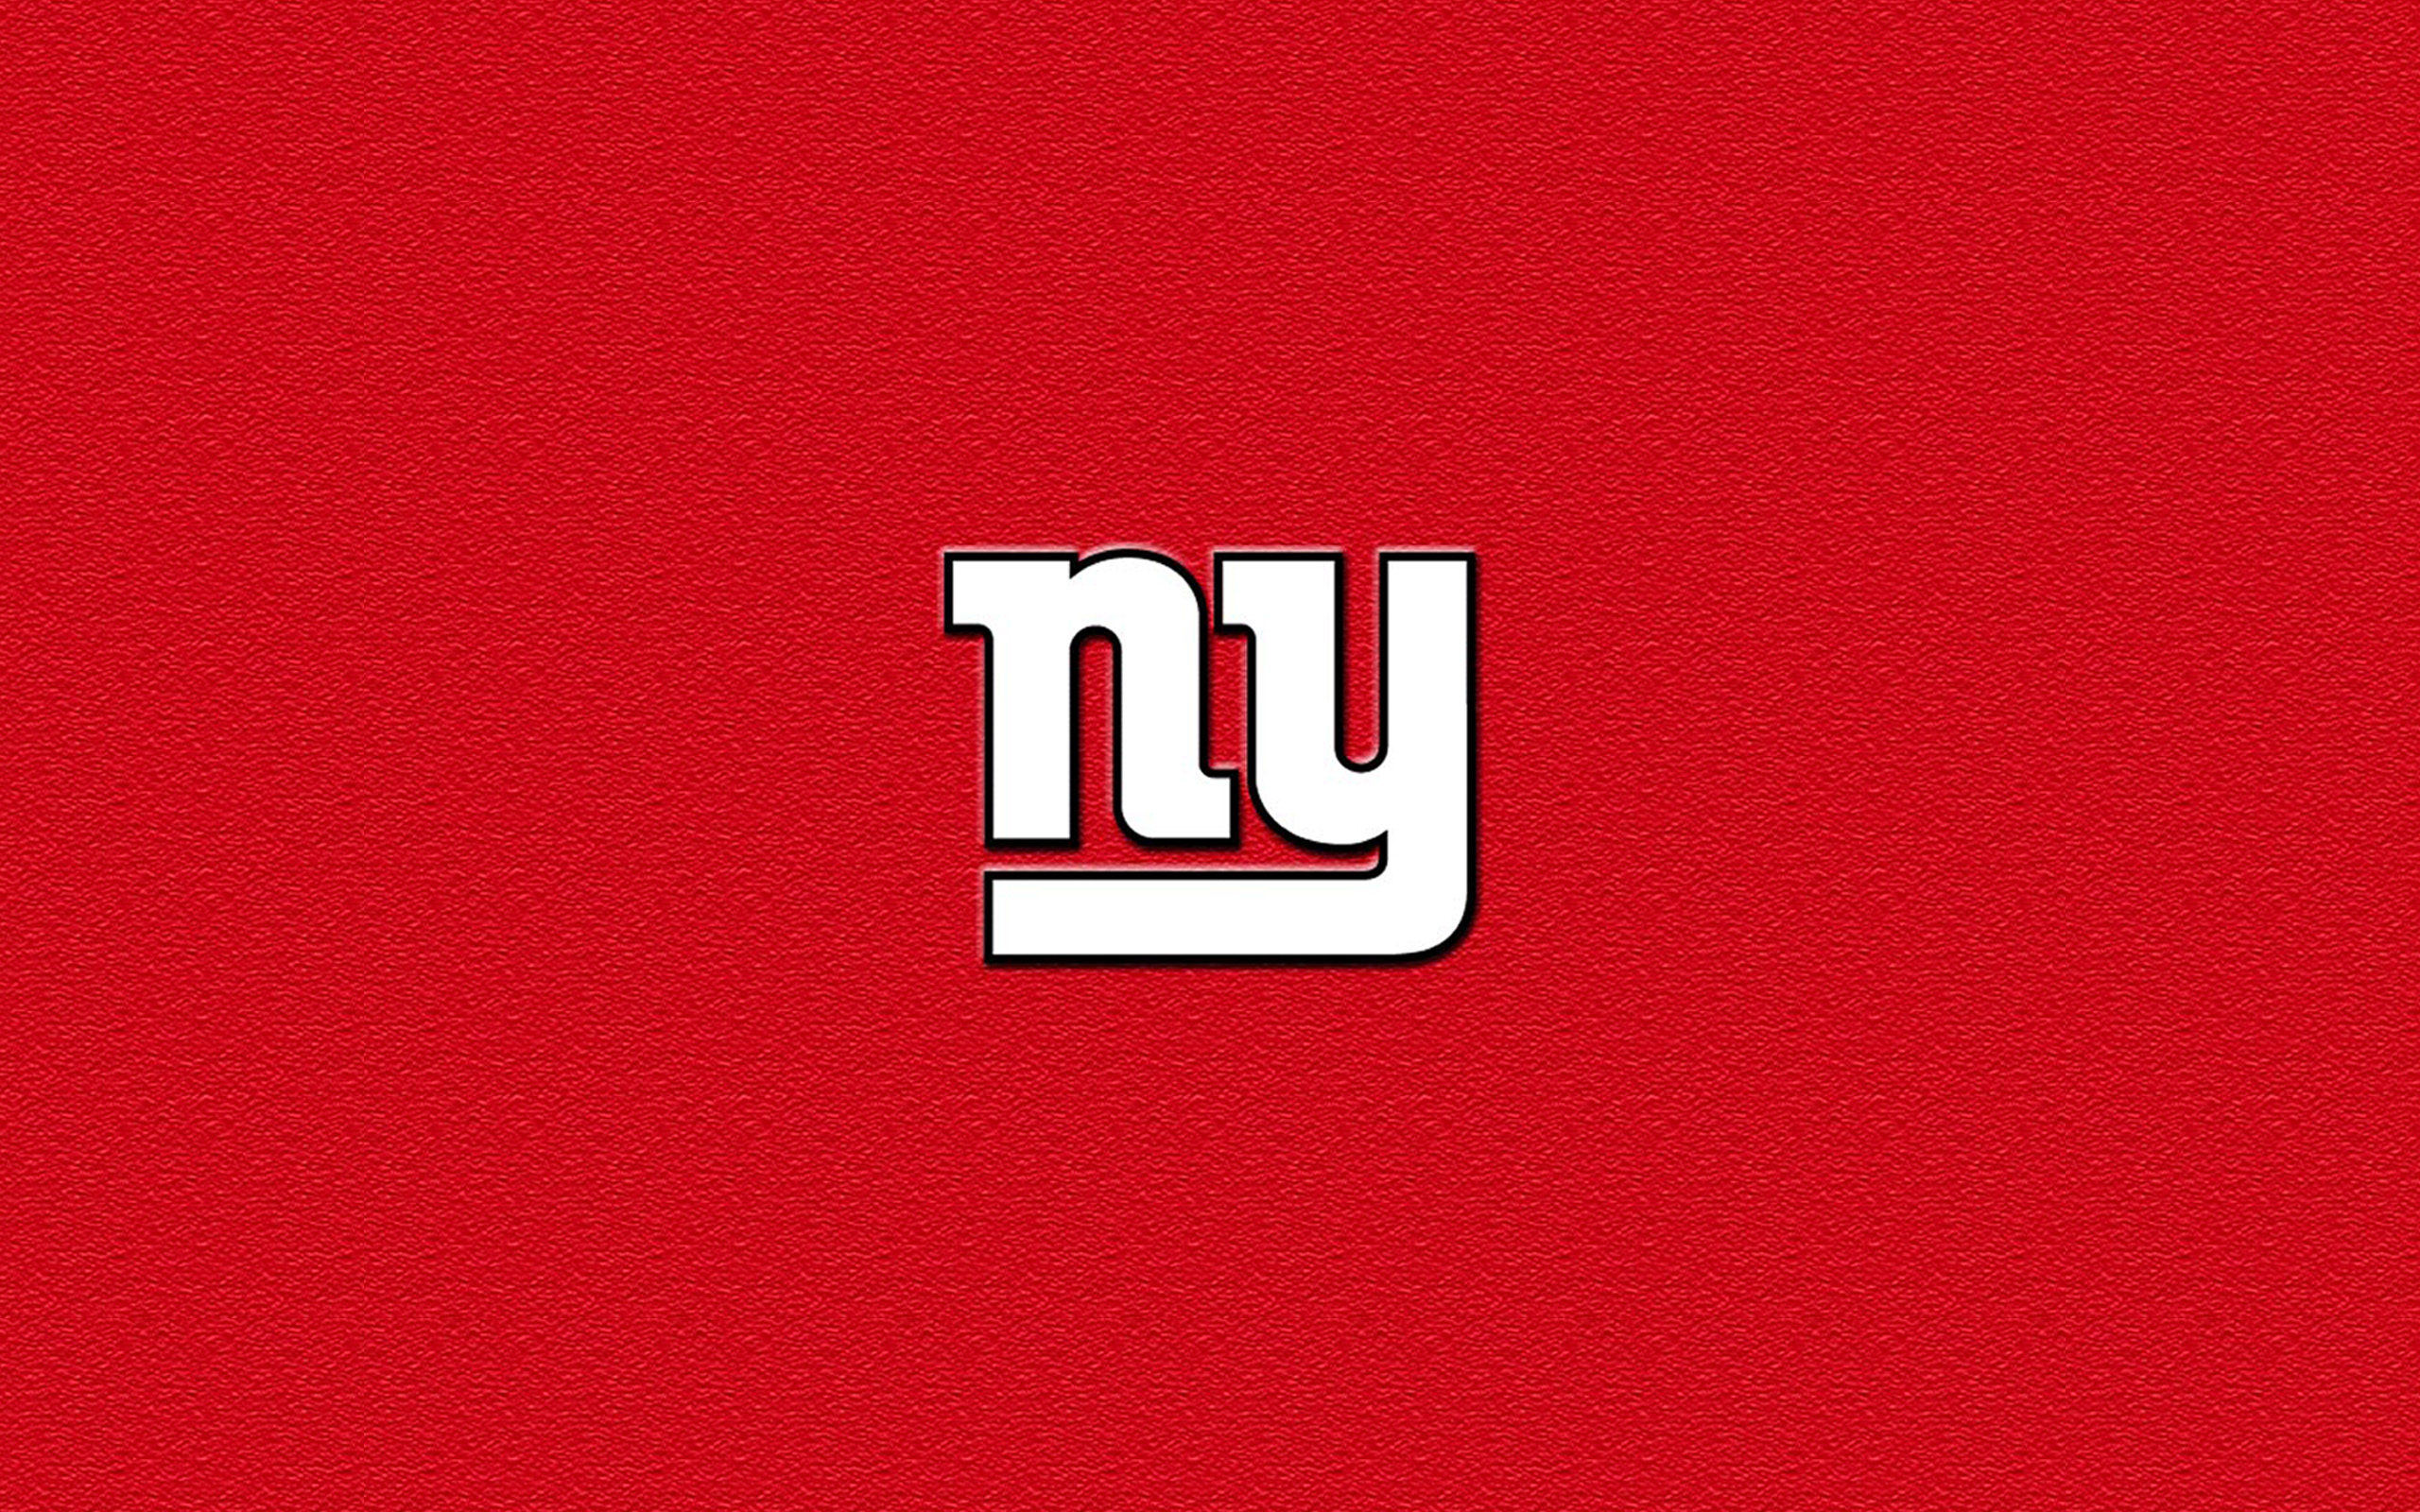 What are some New York Giants wallpaper designs?